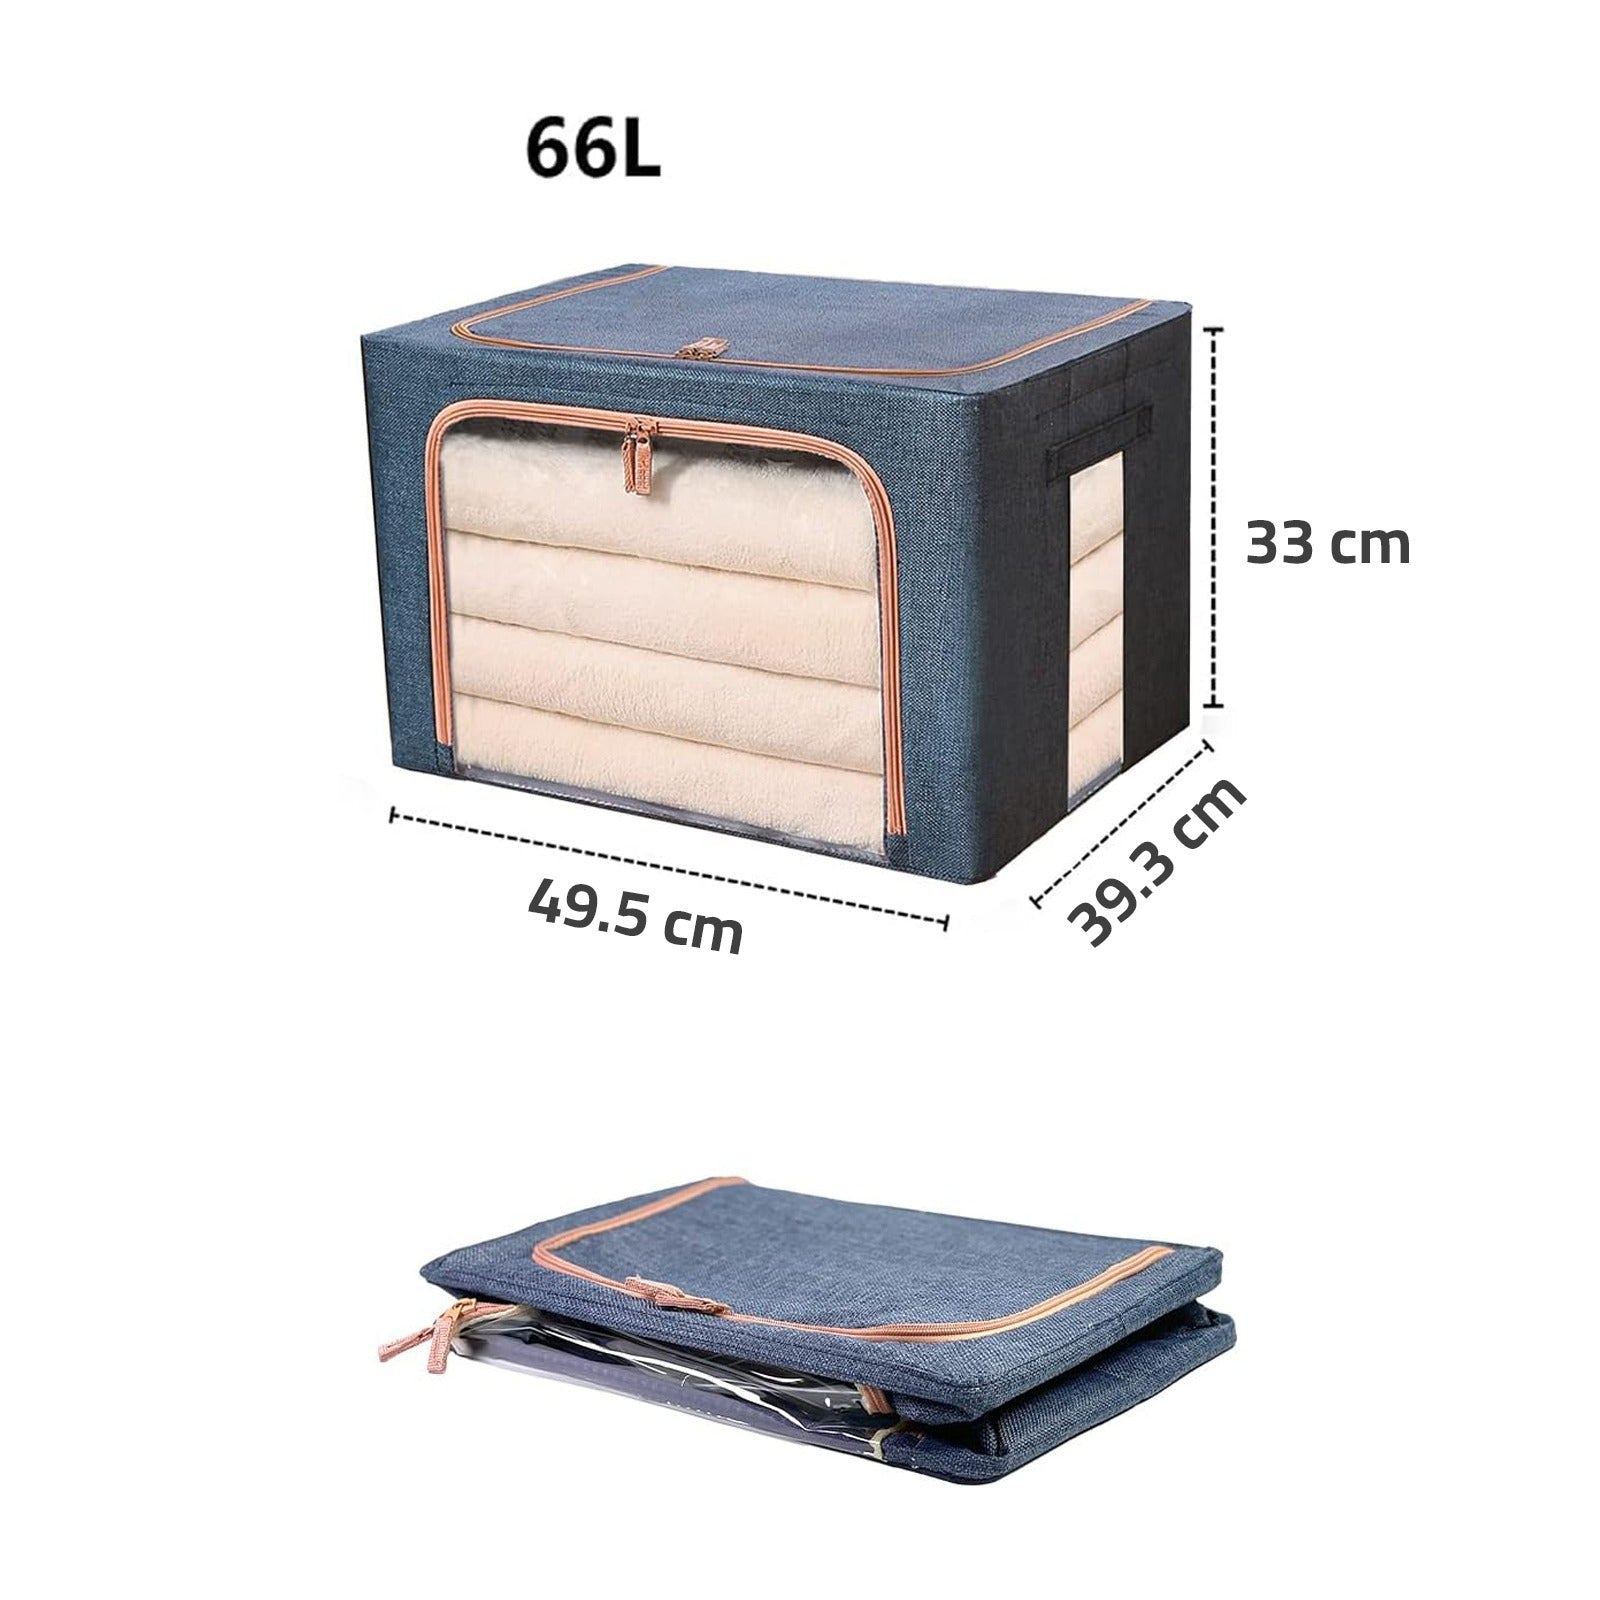 2 x 66L Foldable Large Capacity Cloth Storage with its size